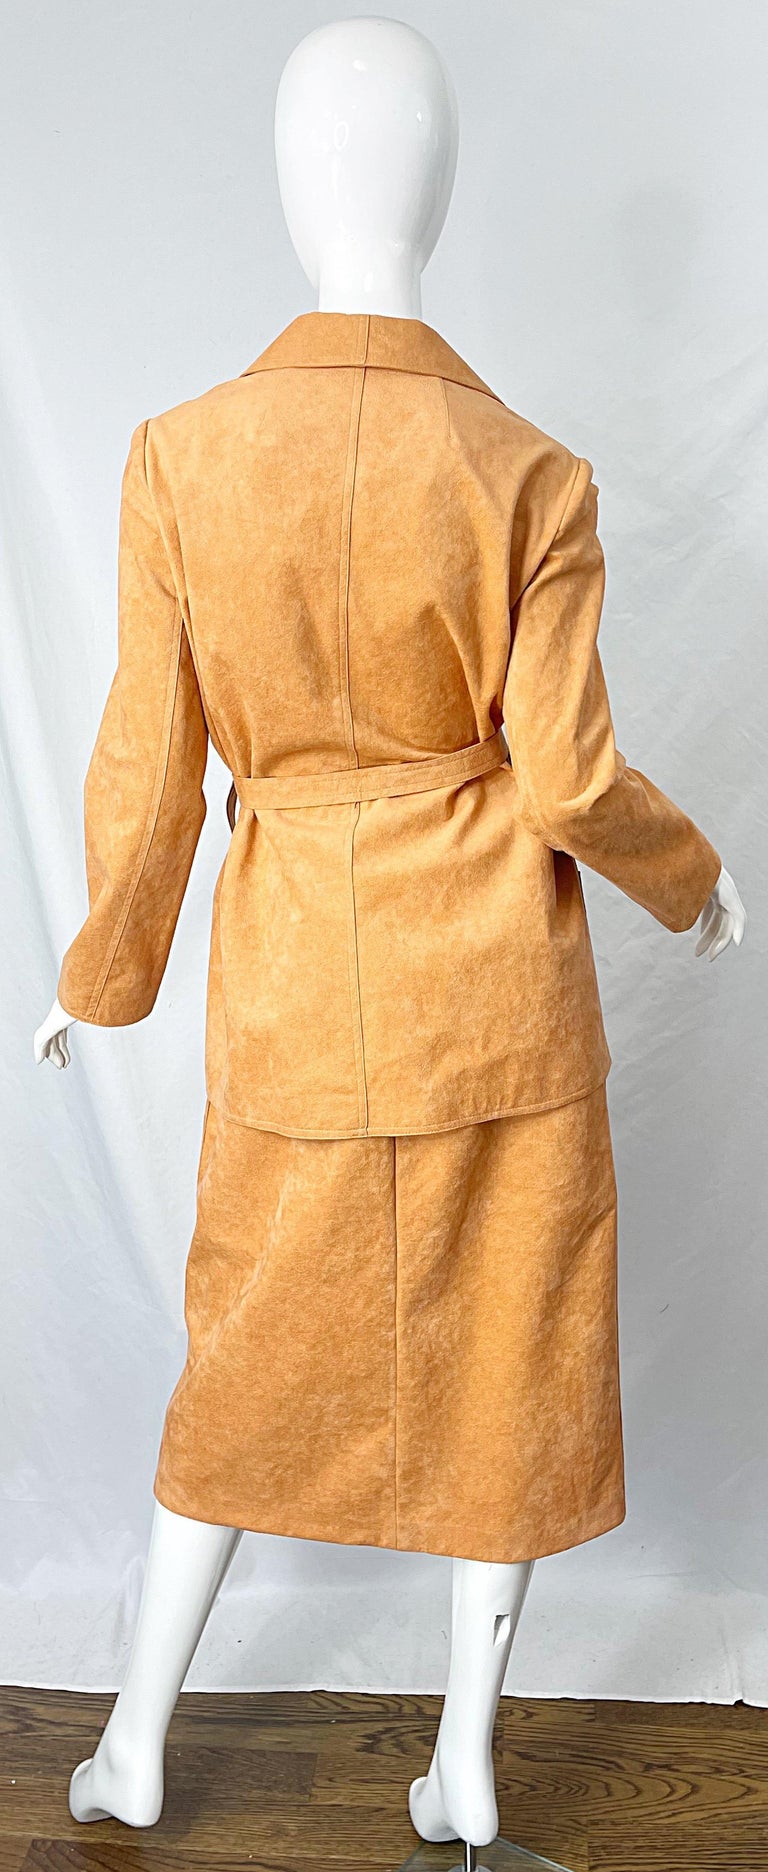 Halston 1970s Salmon Peach Ultrasuede Vintage 70s Belted Jacket and Skirt Suit For Sale 2